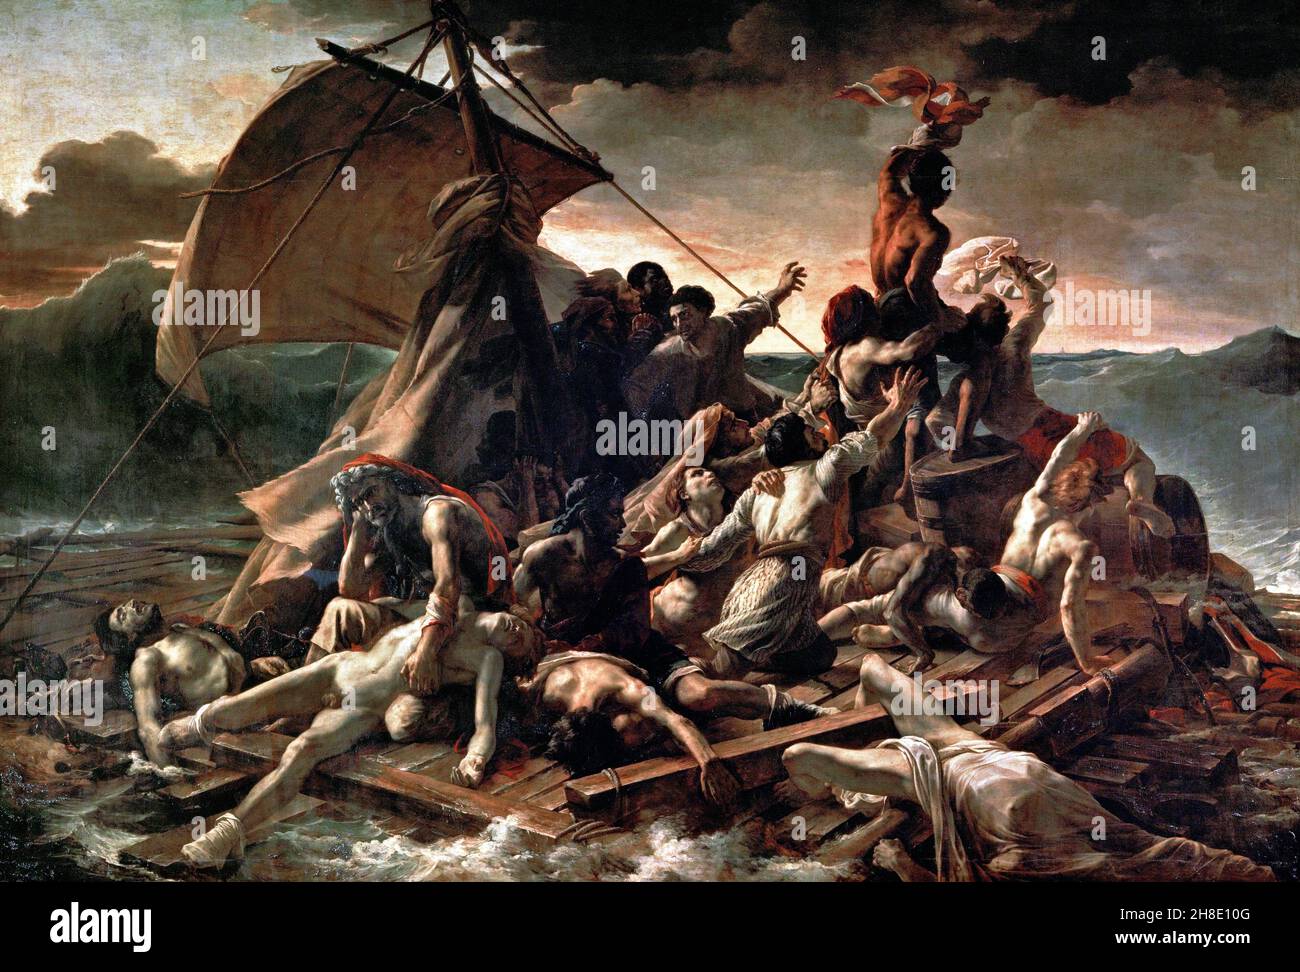 The Raft of the Medusa by the French artist, Théodore Géricault (1791-1824), oil on canvas, c. 1818-19 Stock Photo